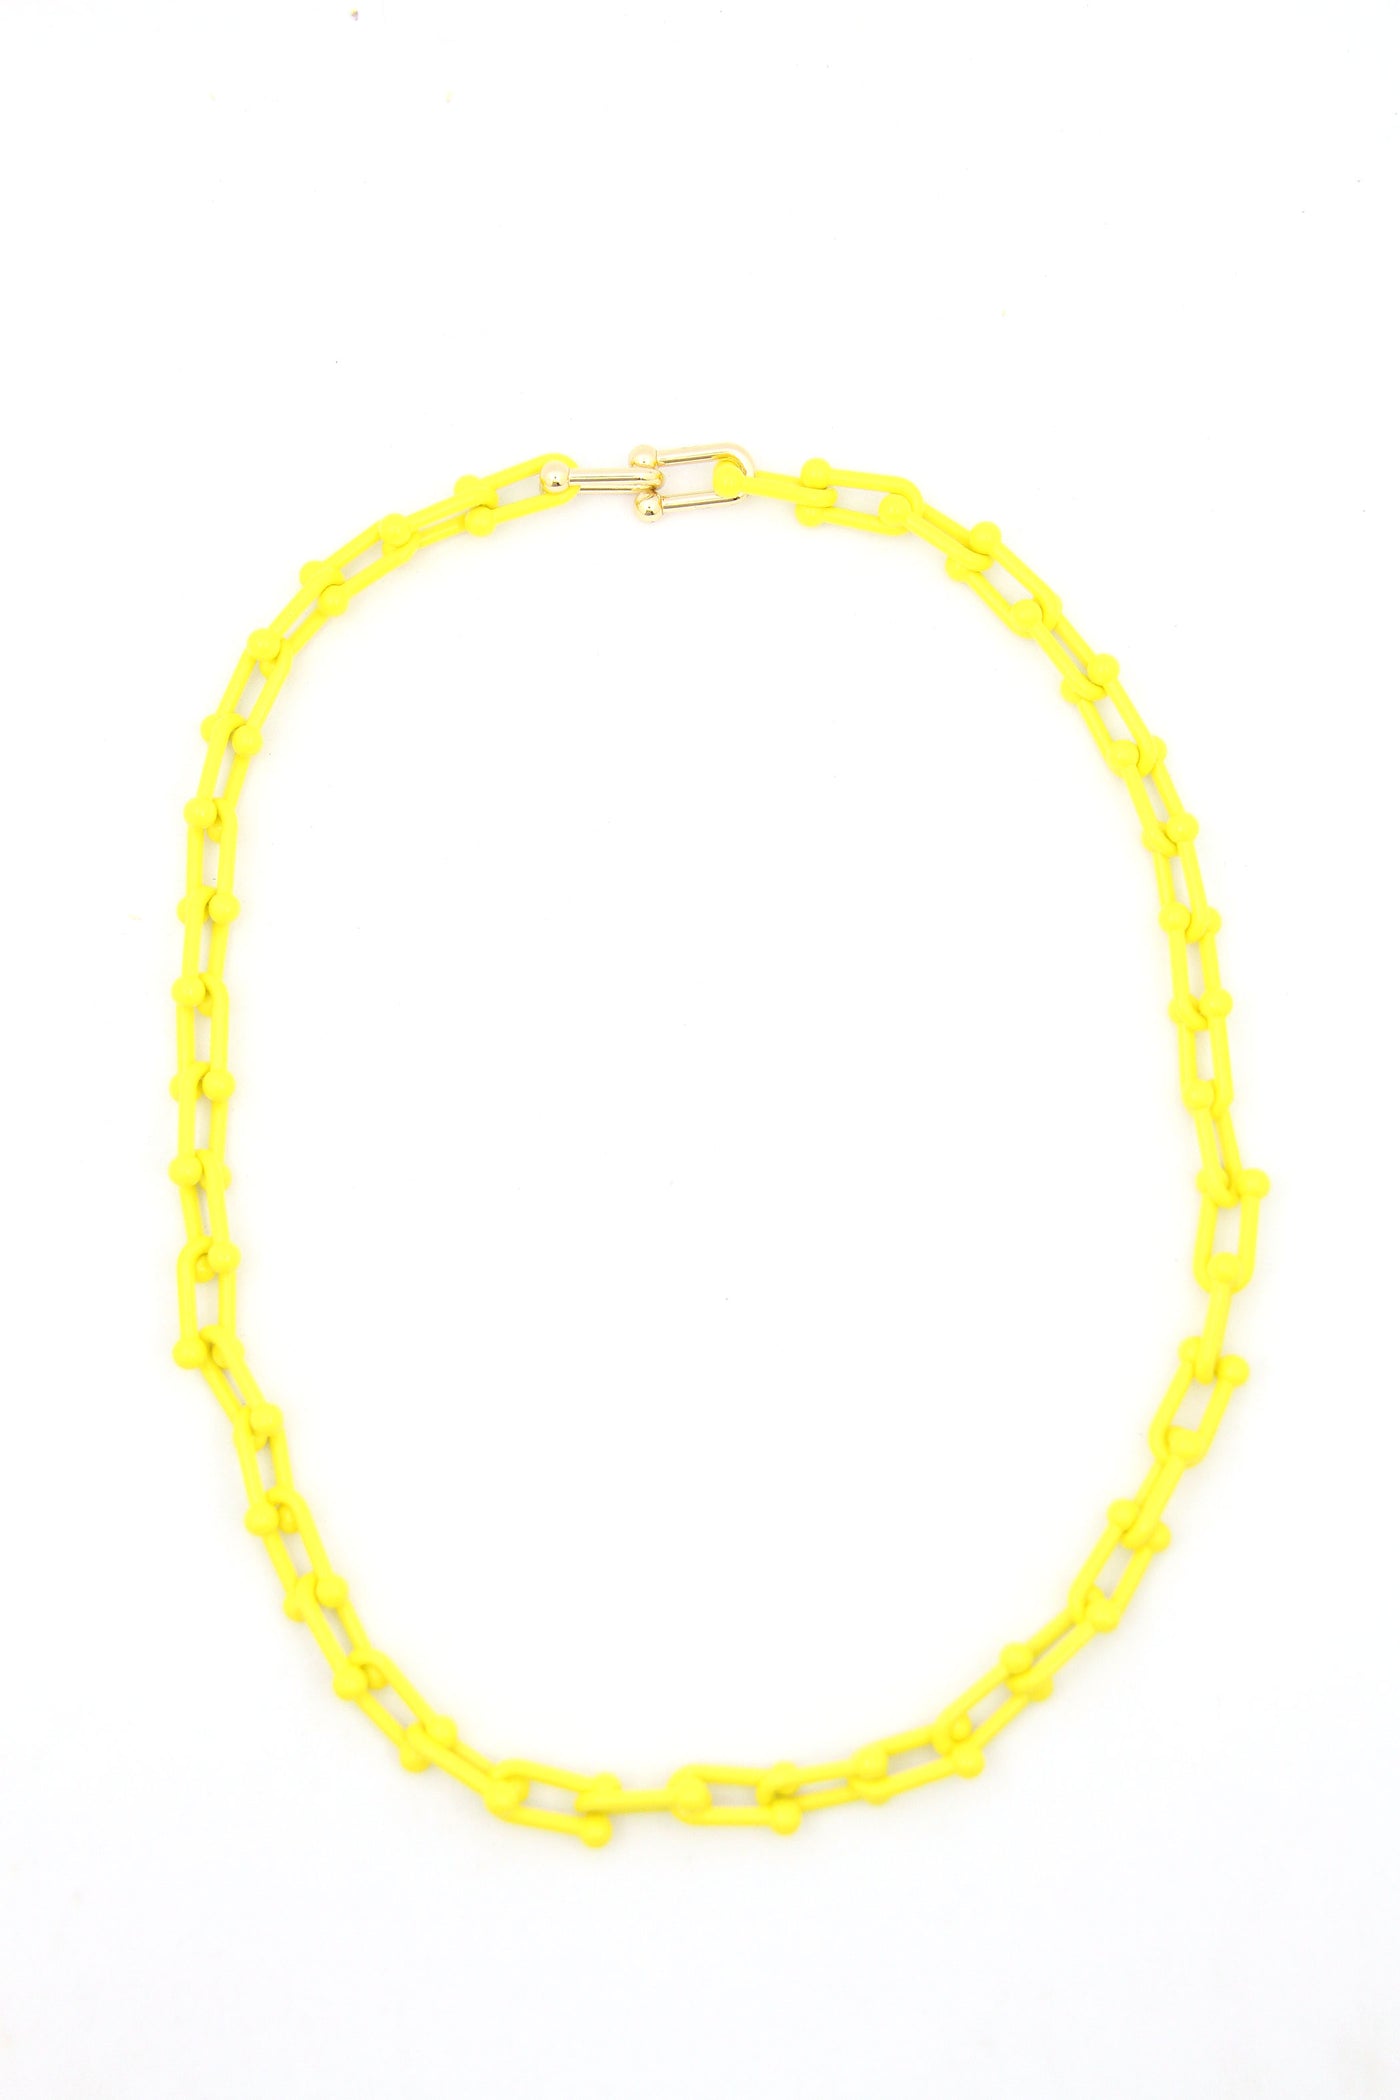 Pop Chain Necklace, Assorted Colors, 18"